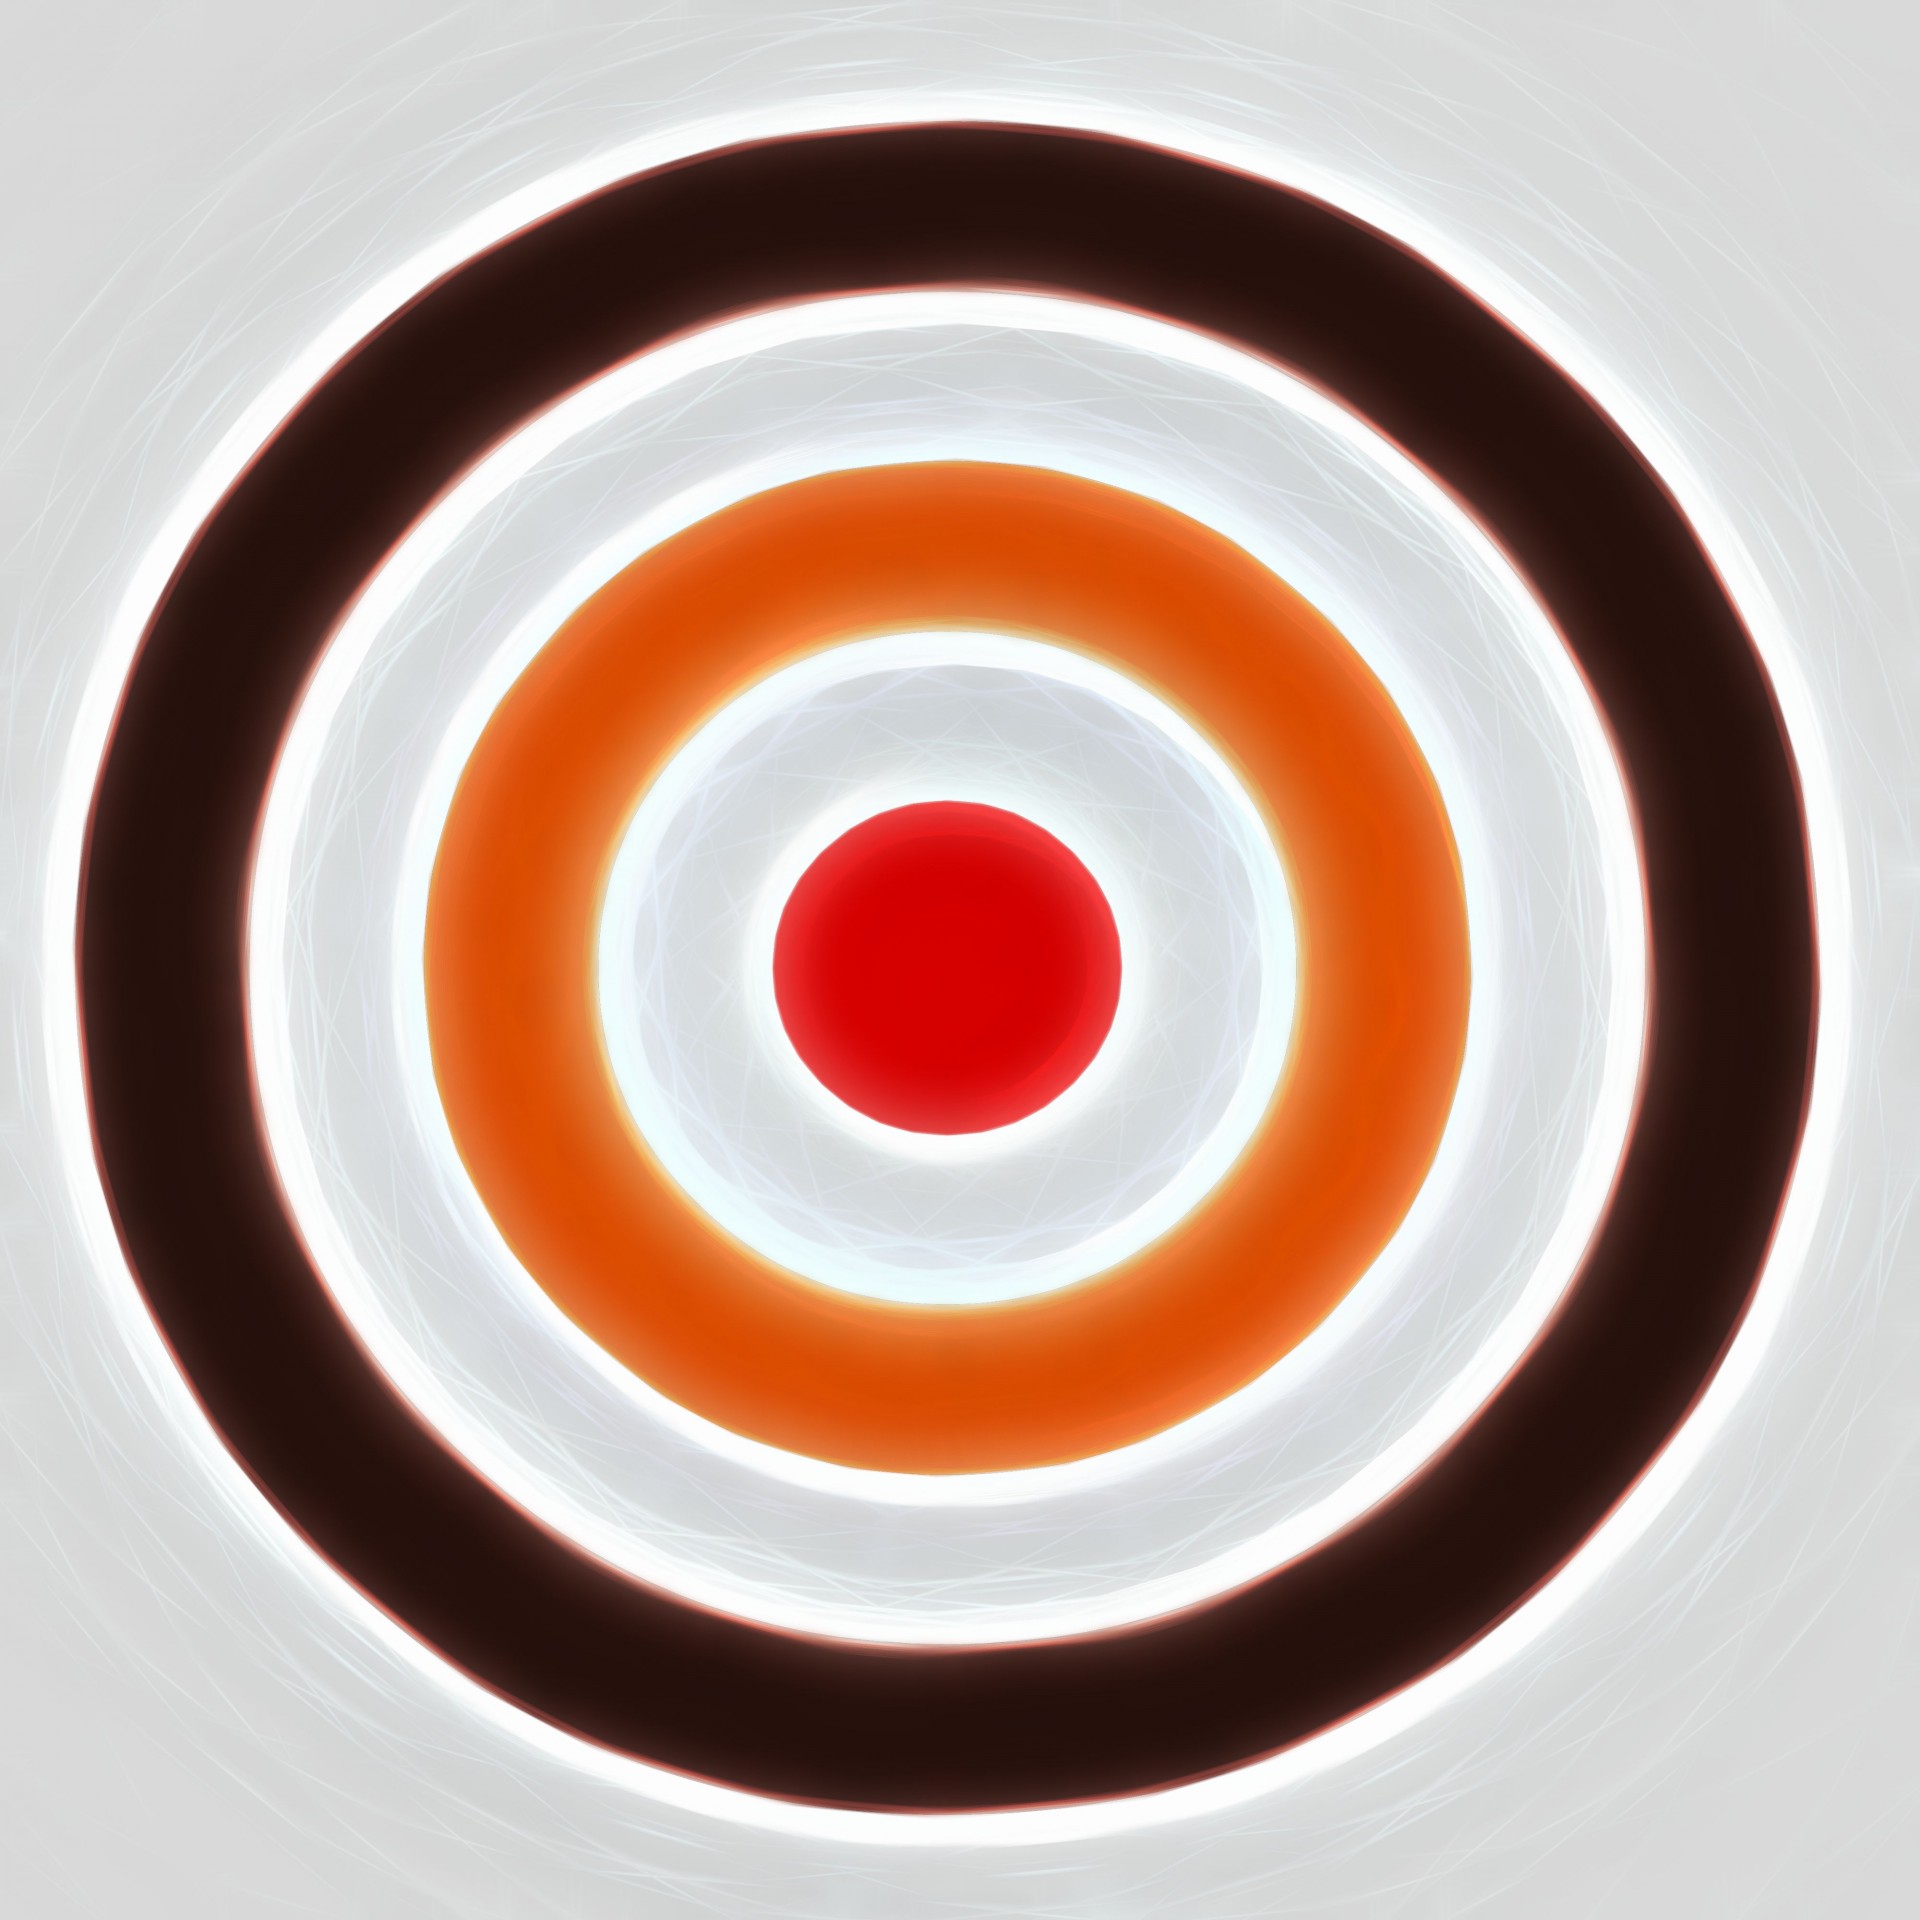 target icon concentric free photo